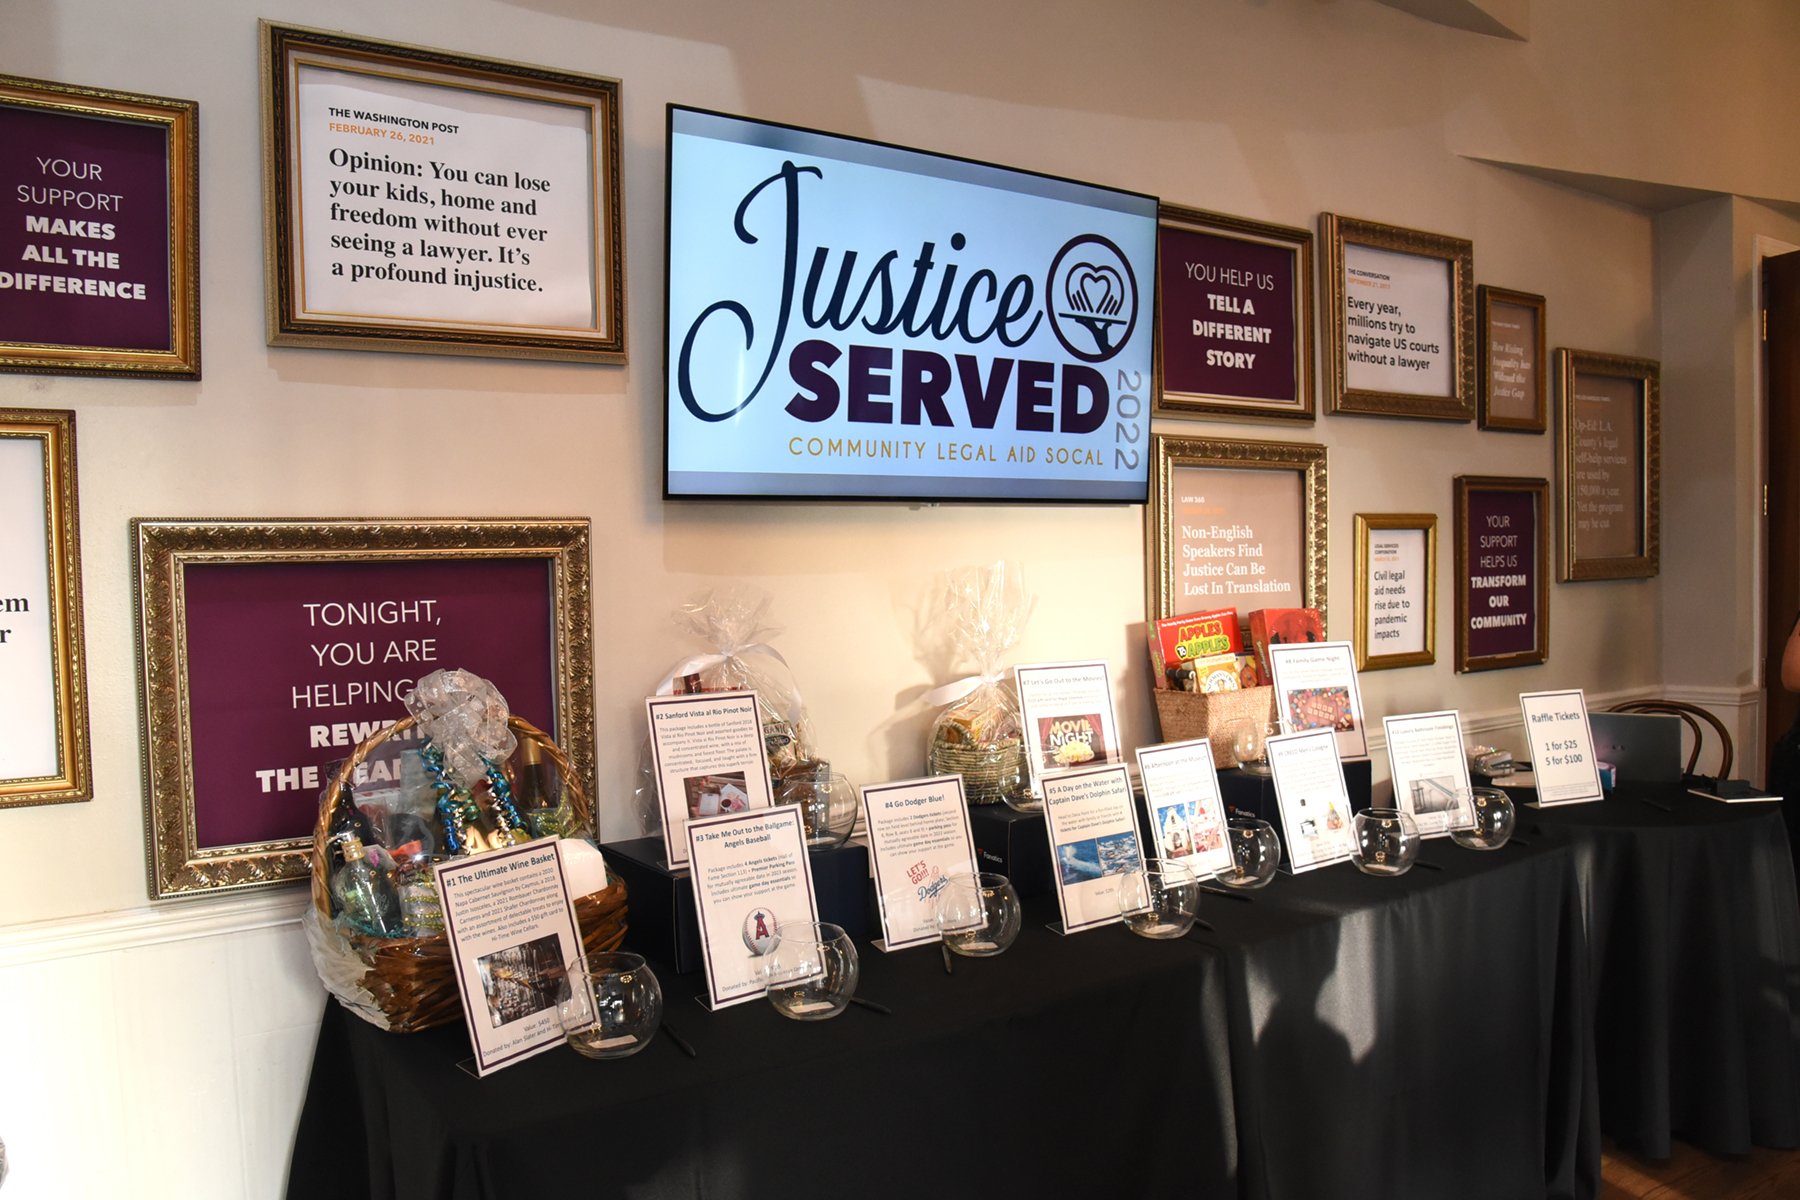 Justice_Served_Comm_Legal_Aid_So_Cal_10-6-22_017.jpg